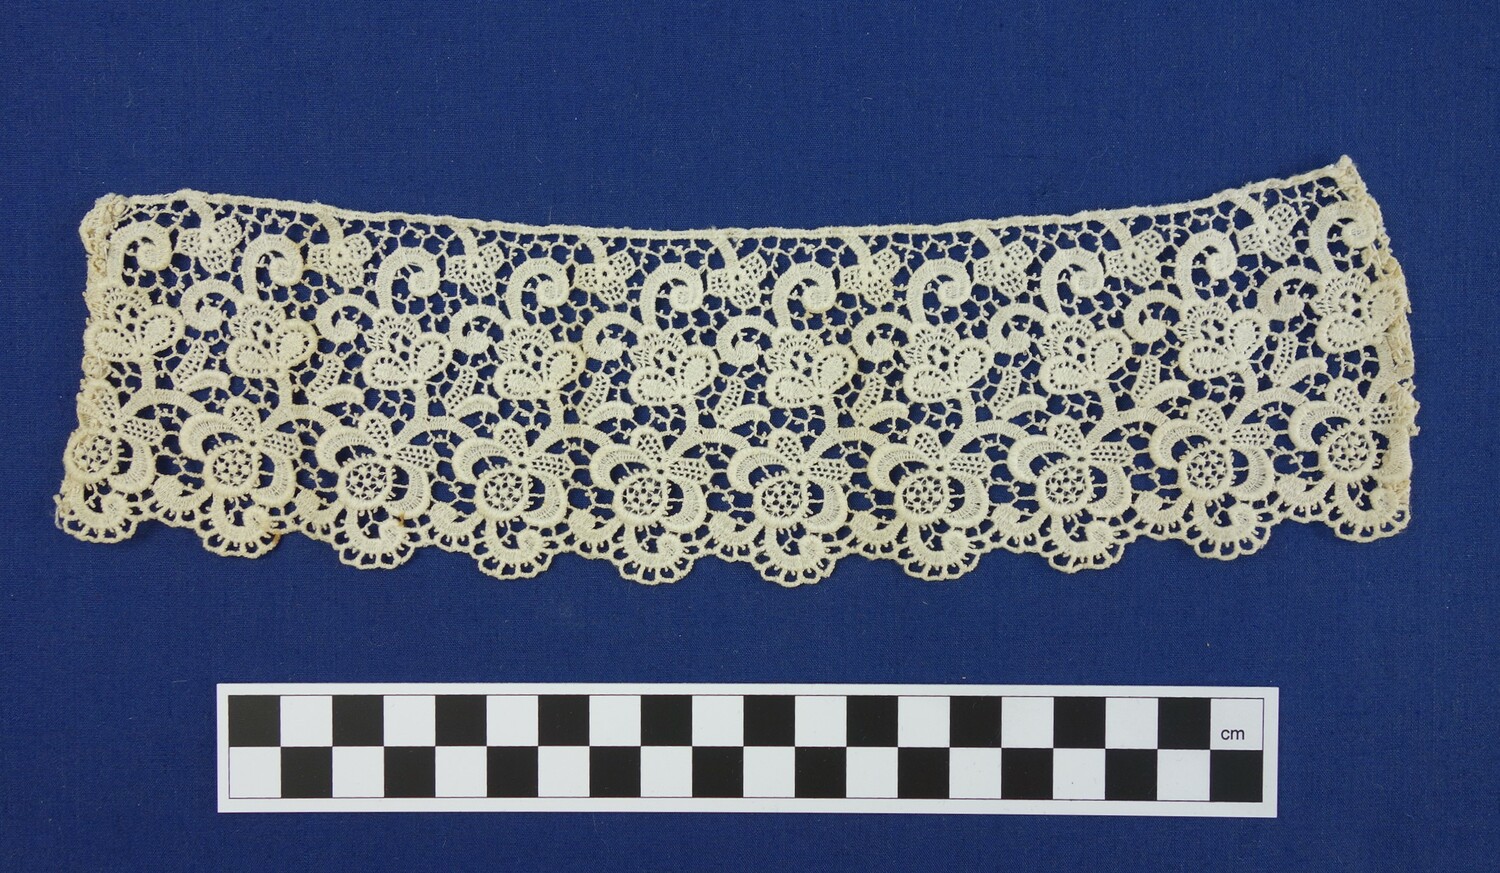 Ecru sample of machine-made chemical lace. The Netherlands, 20th century (TRC 2007.0595).